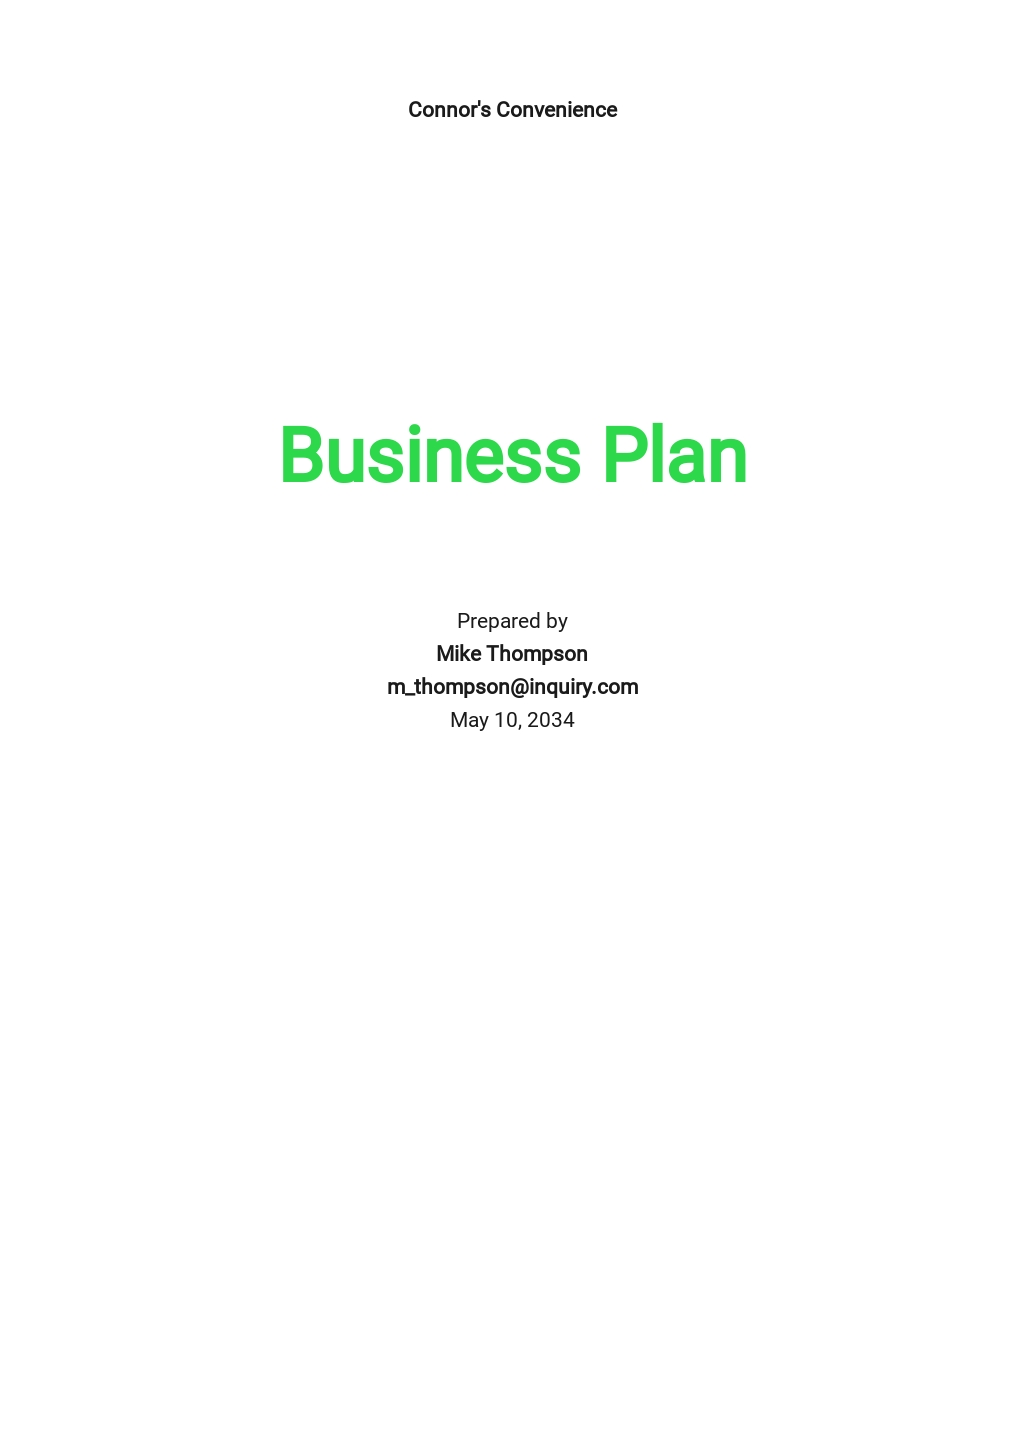 business plan sample for convenience store